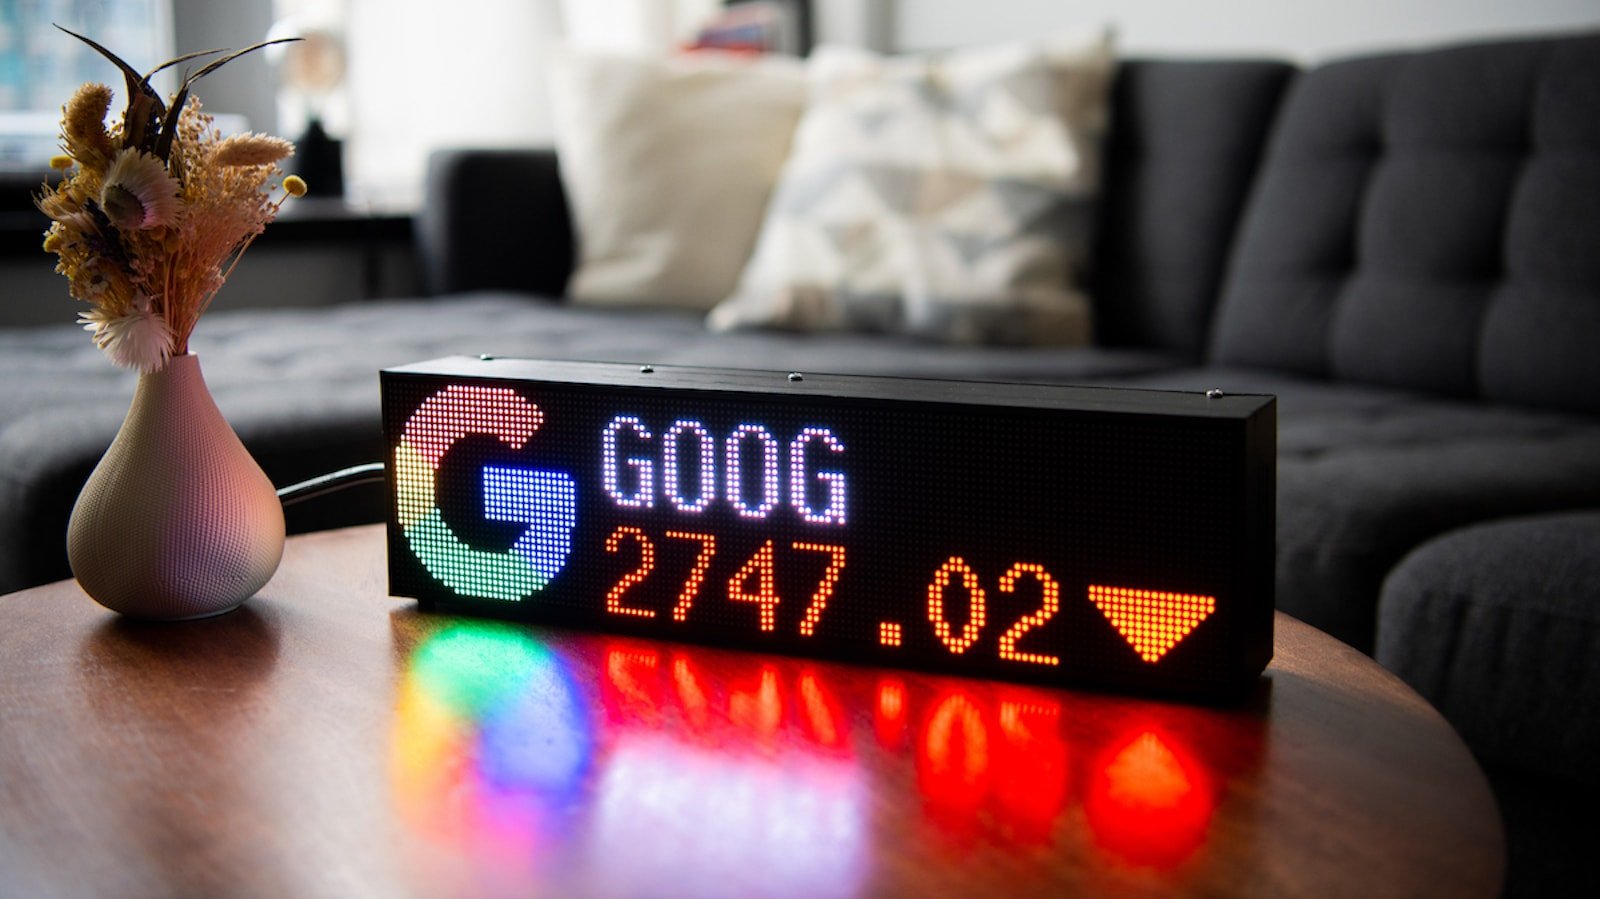 Fintic LED ticker displays stocks, crypto, forex, weather, news, sports, and more » Gadget Flow